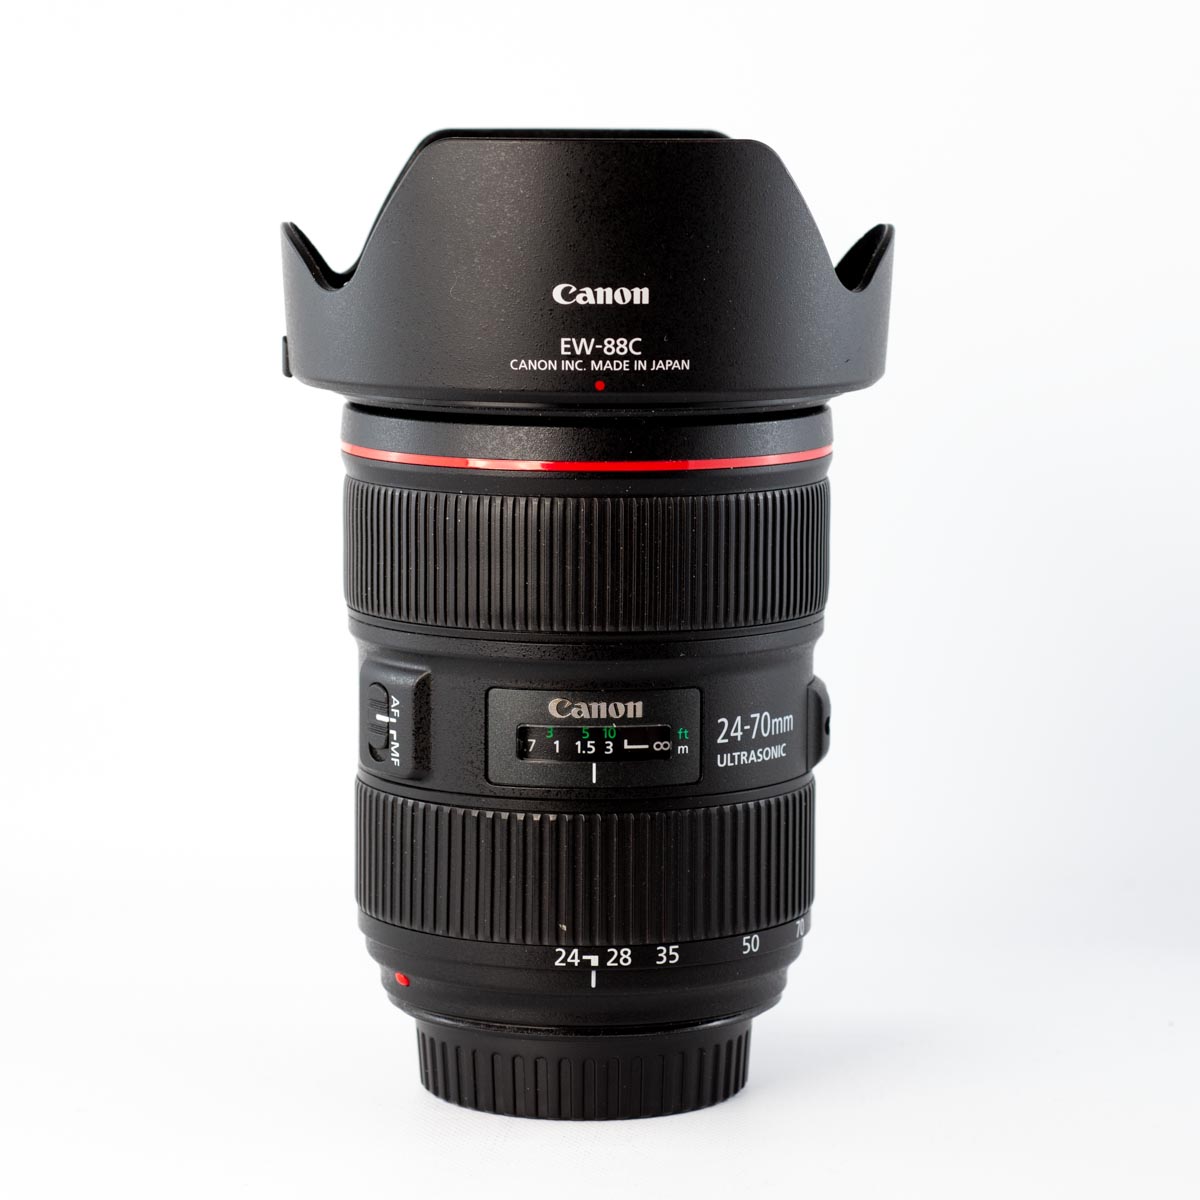 TThumbnail image for Canon 24-70mm F2.8 L II USM *A*